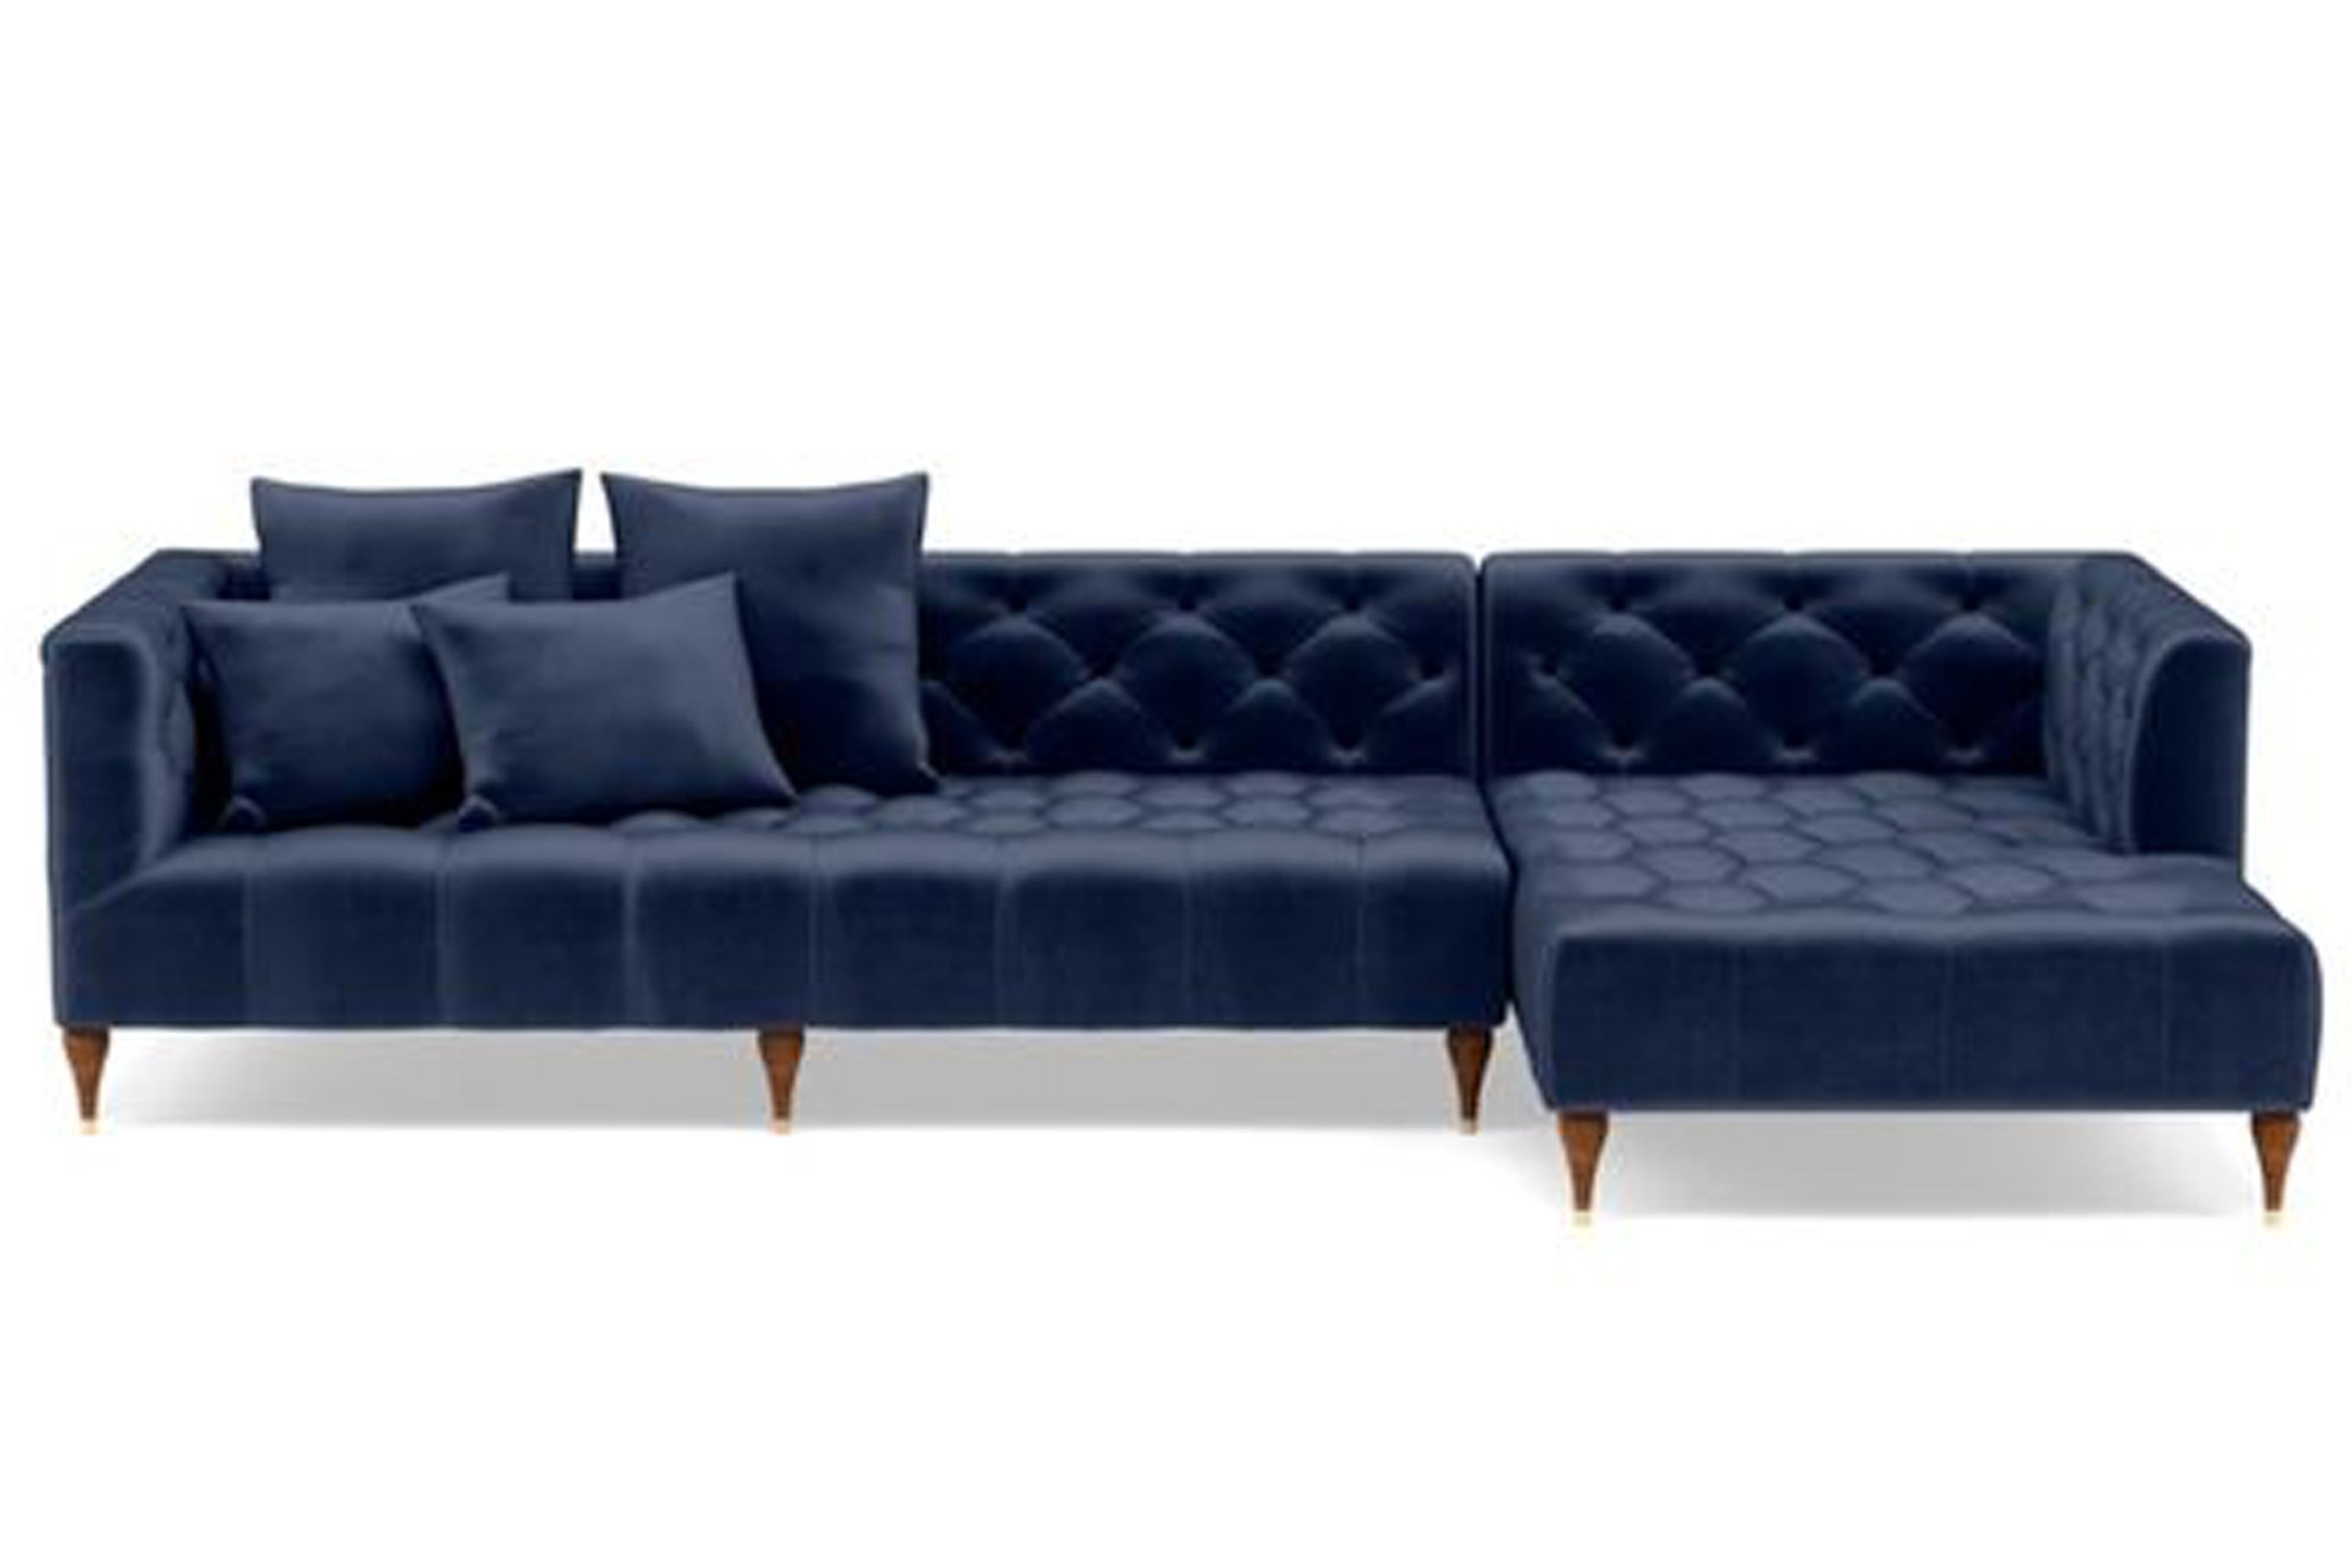 Custom Ms. Chesterfield Sectional Sofa with Right Chaise  Oiled Walnut with Brass Cap Stiletto Legs - 114", DECIDE LATER FABRIC - Interior Define